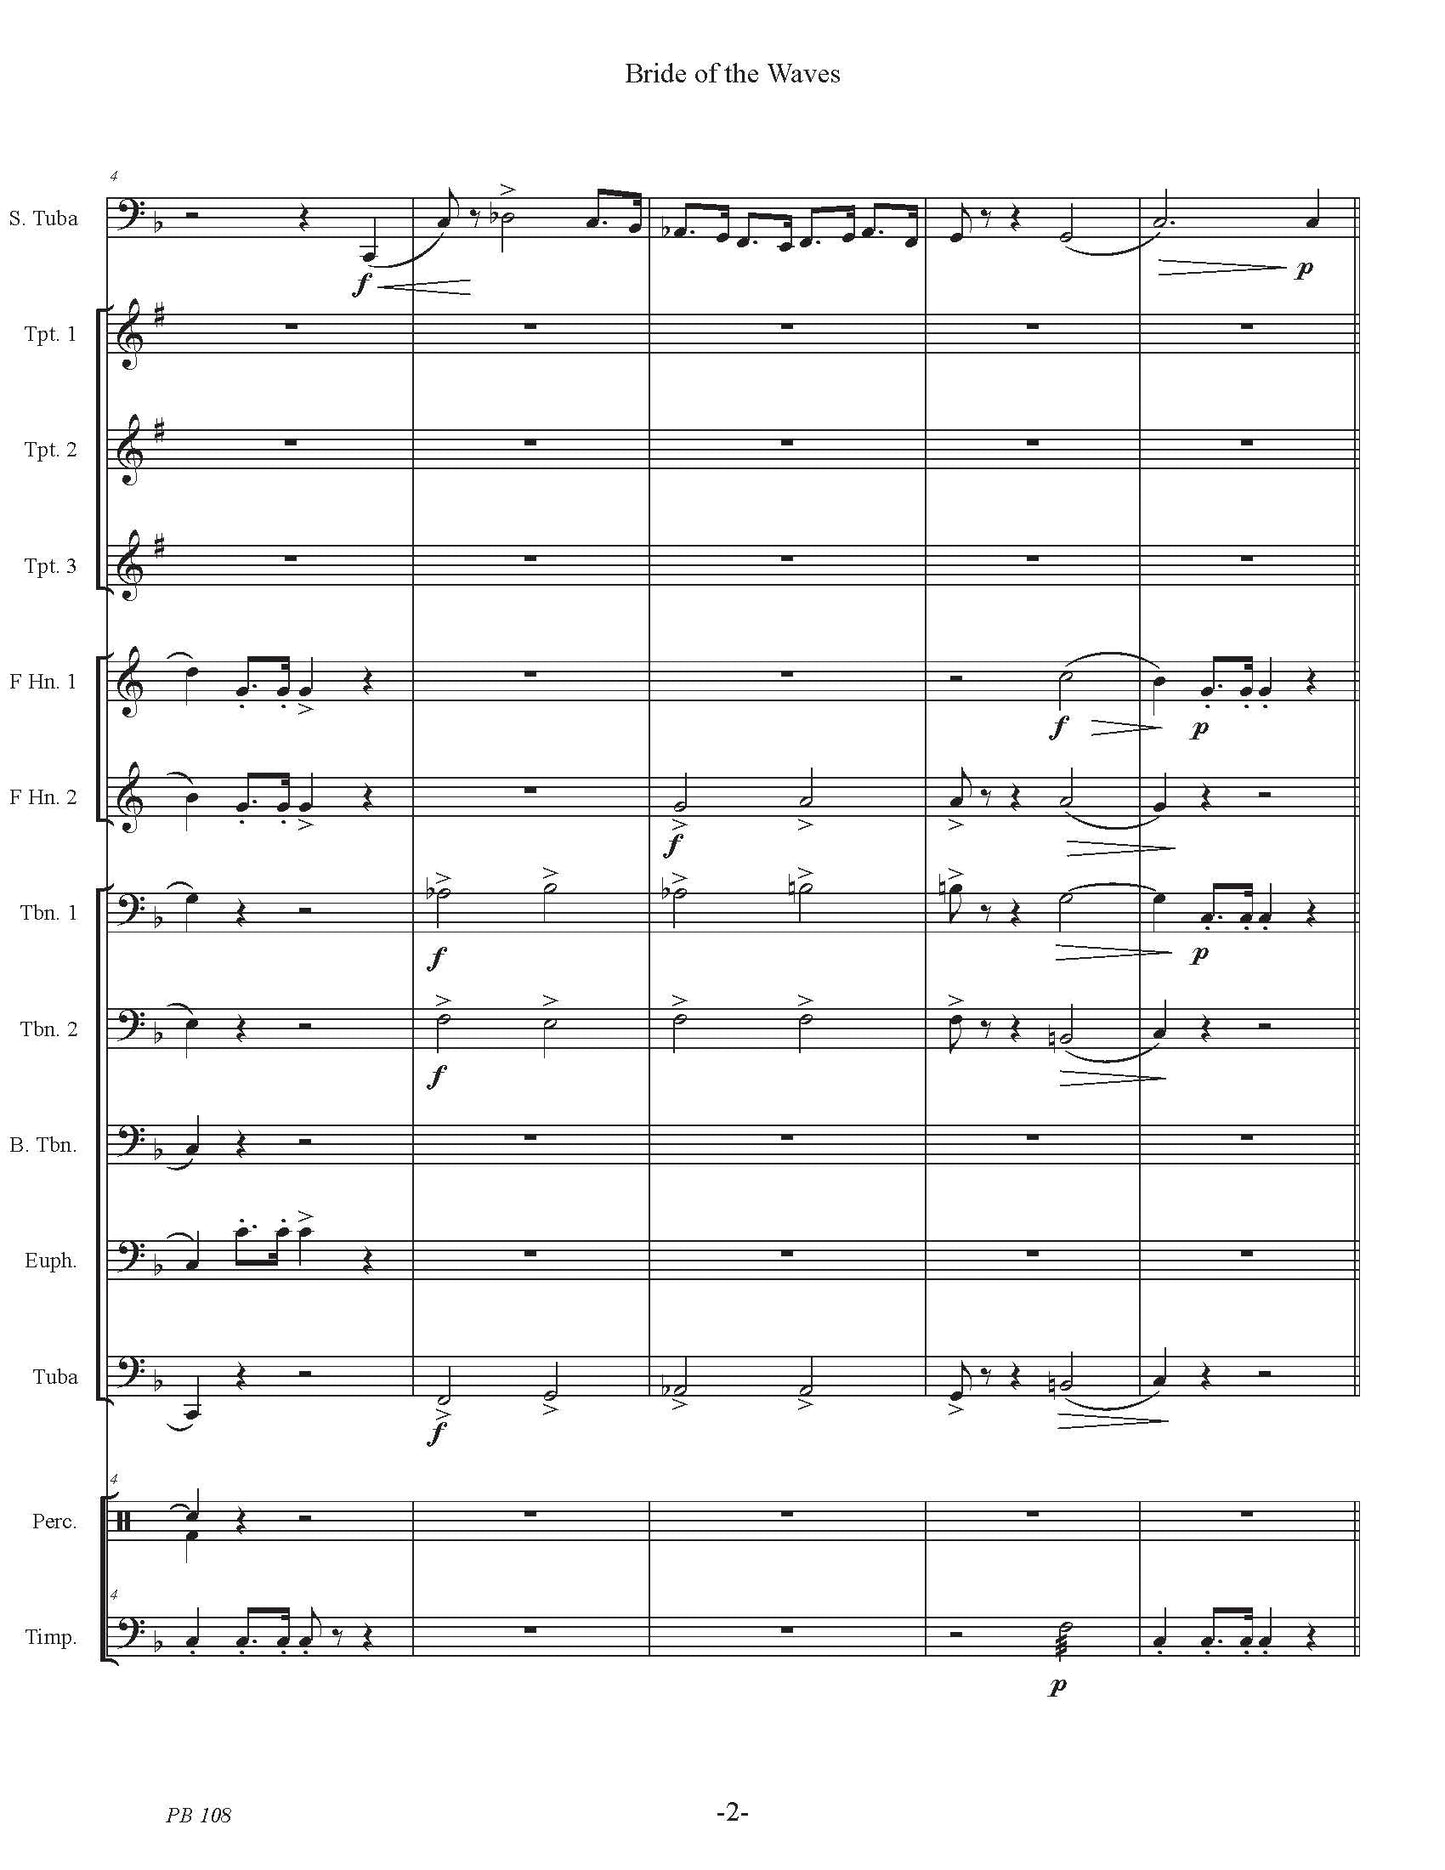 Bride of the Waves for Solo Tuba and Brass Ensemble - DOWNLOADABLE